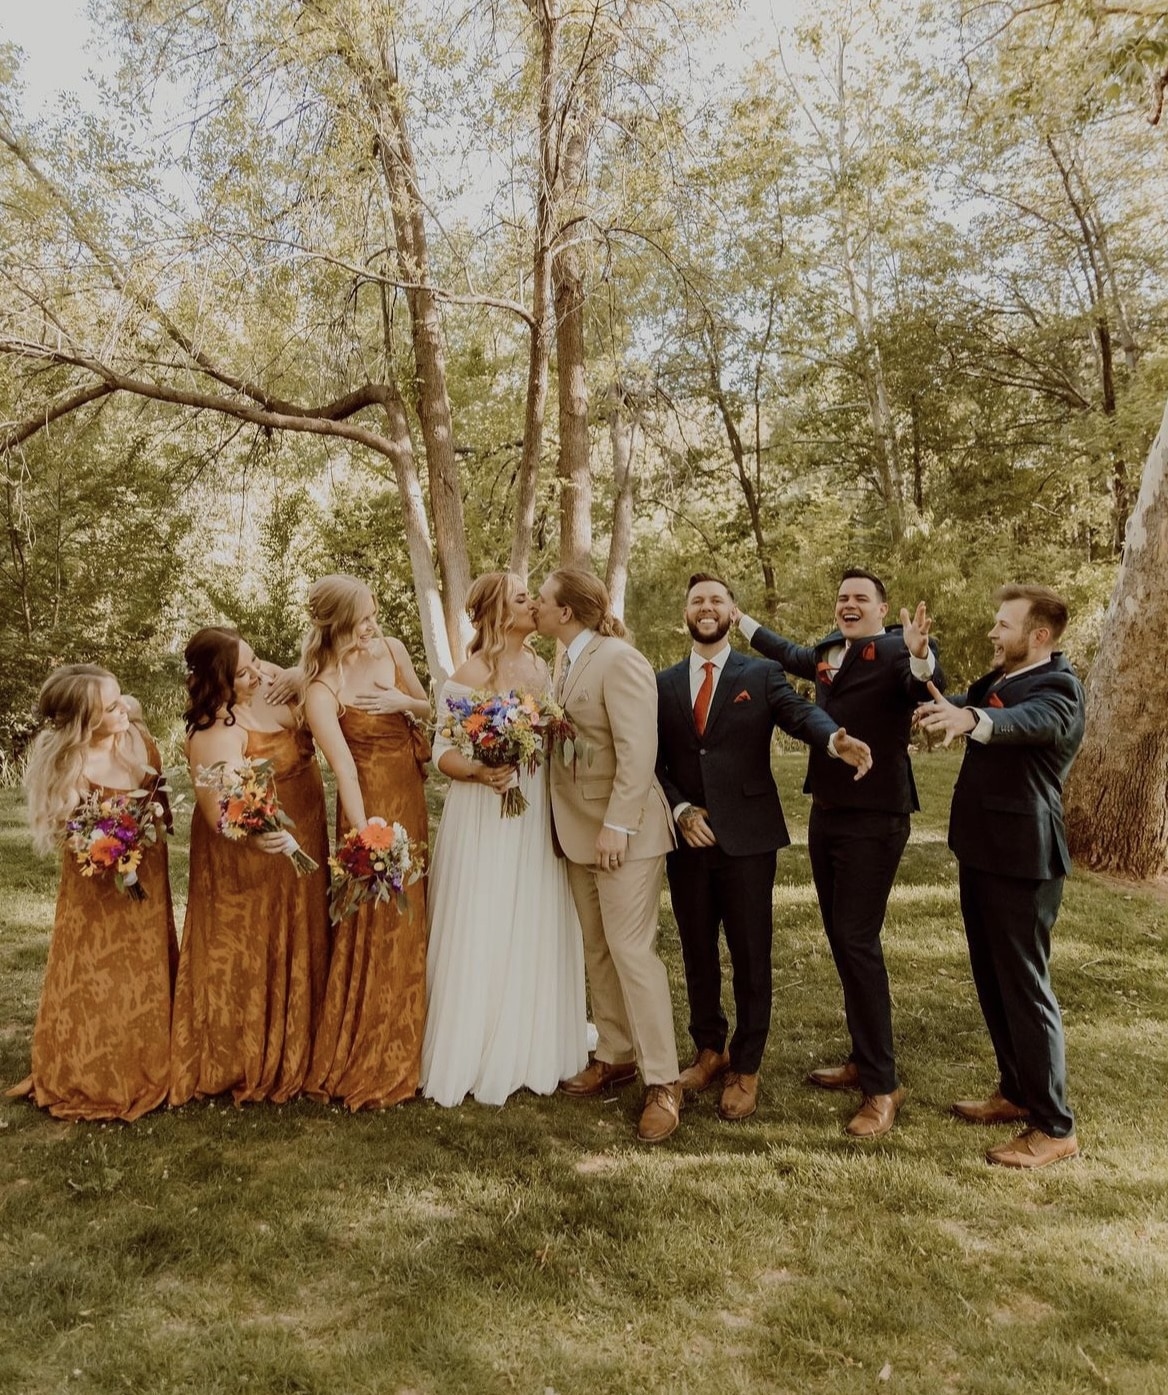 Groom in a tan summer wedding suit kisses his bride while the bridal party watches and cheers